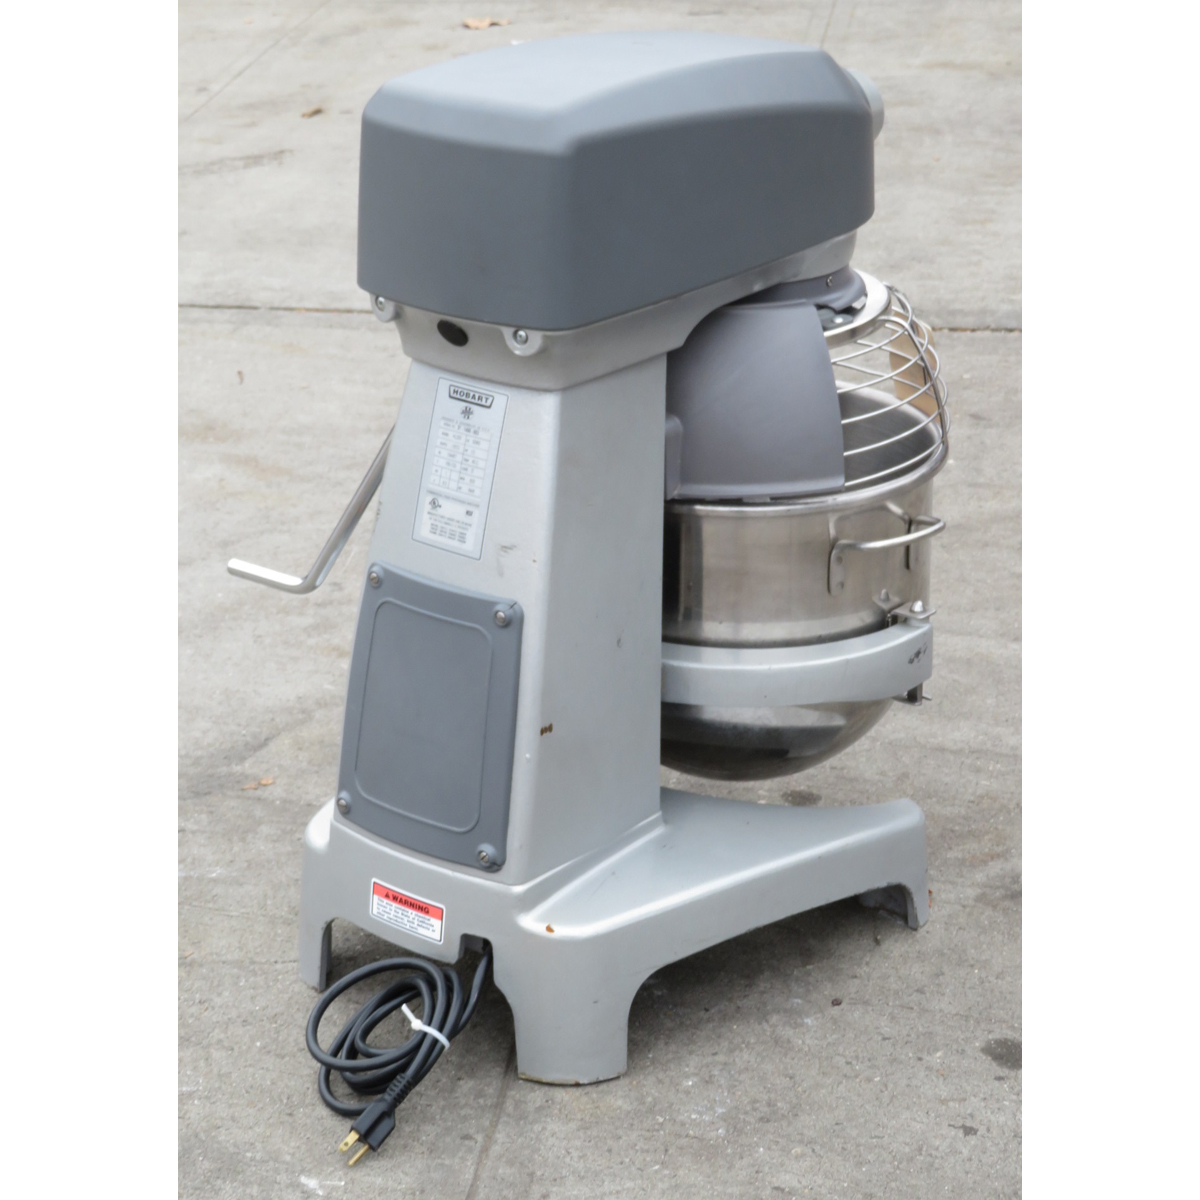 Hobart Legacy 20 Quart HL200 Mixer (Includes Beater & Whip), Used Great Condition image 1